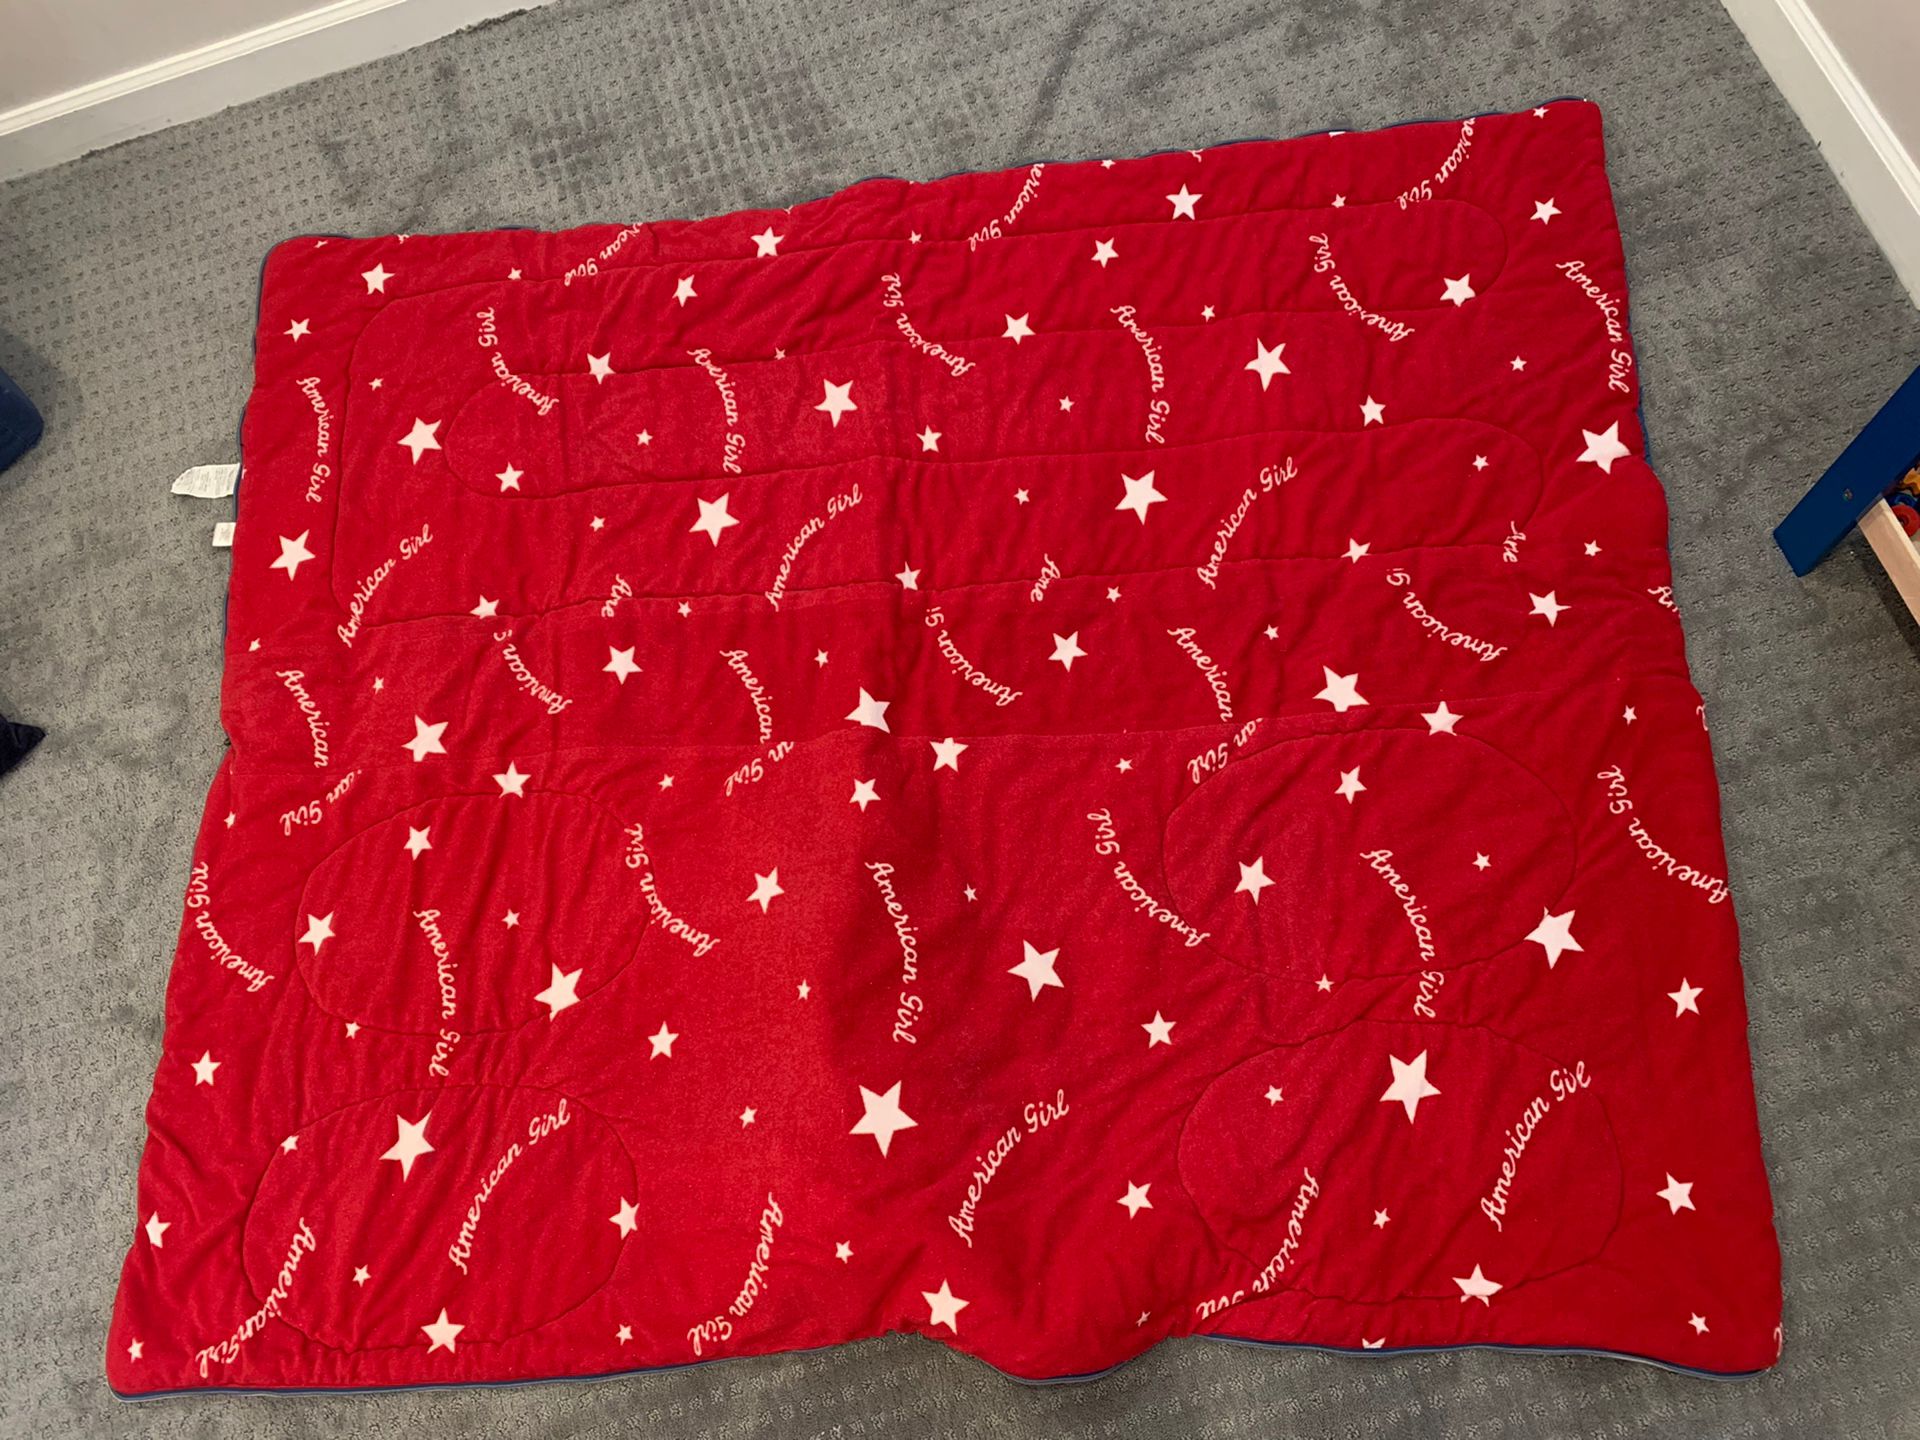 American Girl Sleeping Bag Red With White Stars Folds Into Denim Tote Bag